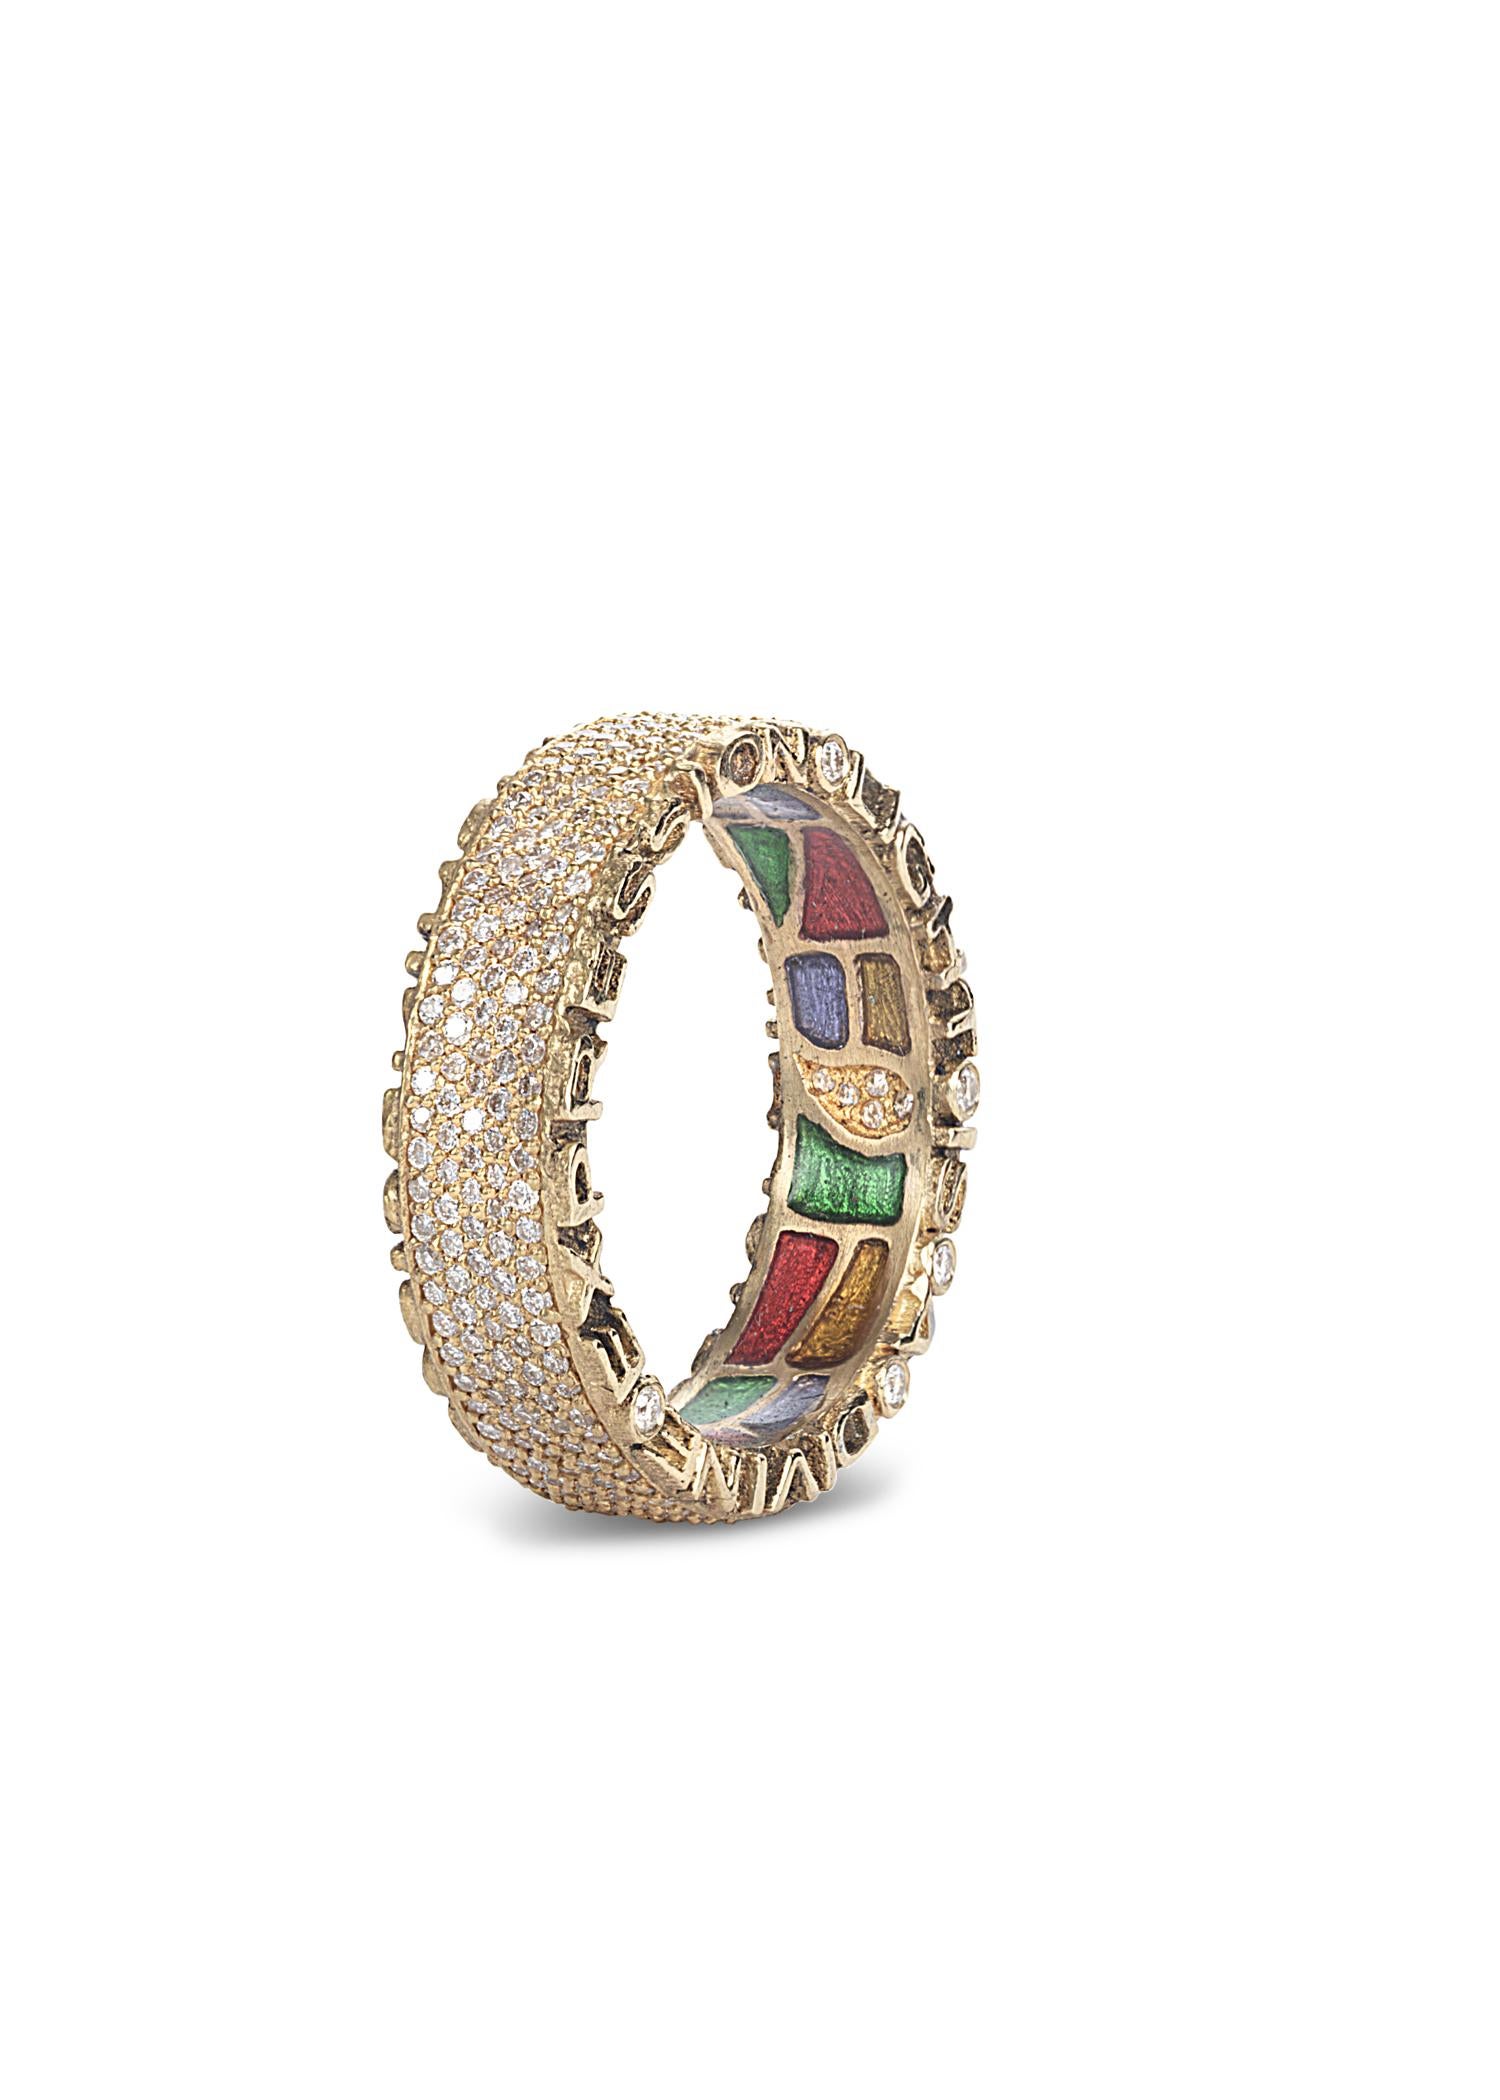 Hand made Coomi Sagrada collection band ring set in 20K yellow gold with 1.12cts pavé diamonds and stained glass-like multicolor enamel gallery. 

Famous Antonio Gaudi quotes 